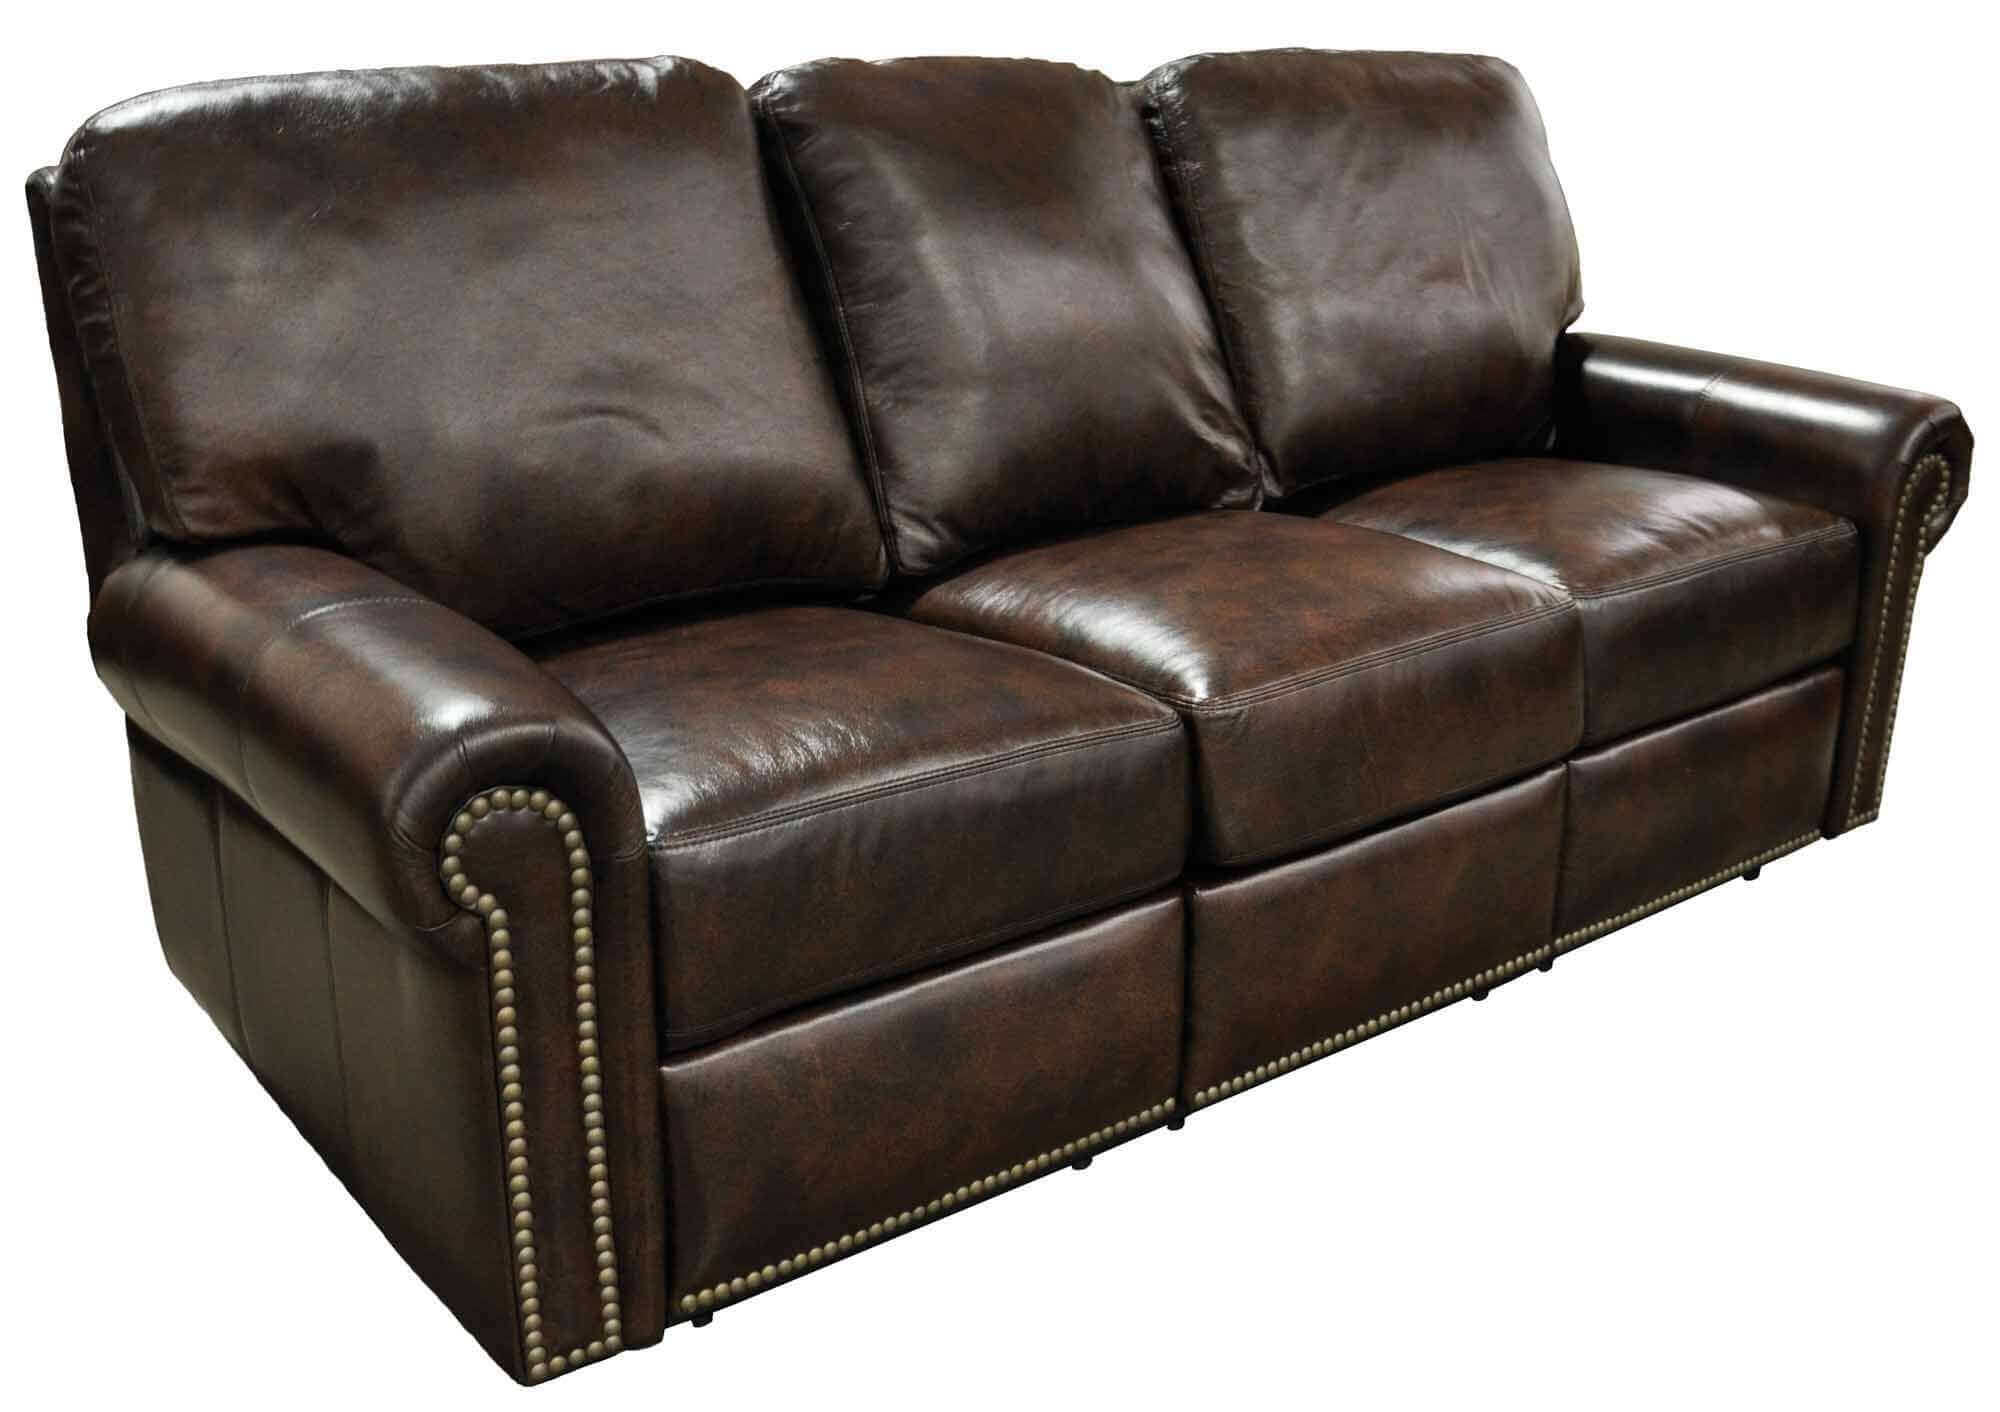 Fairfield Leather Reclining Sofa by American Style